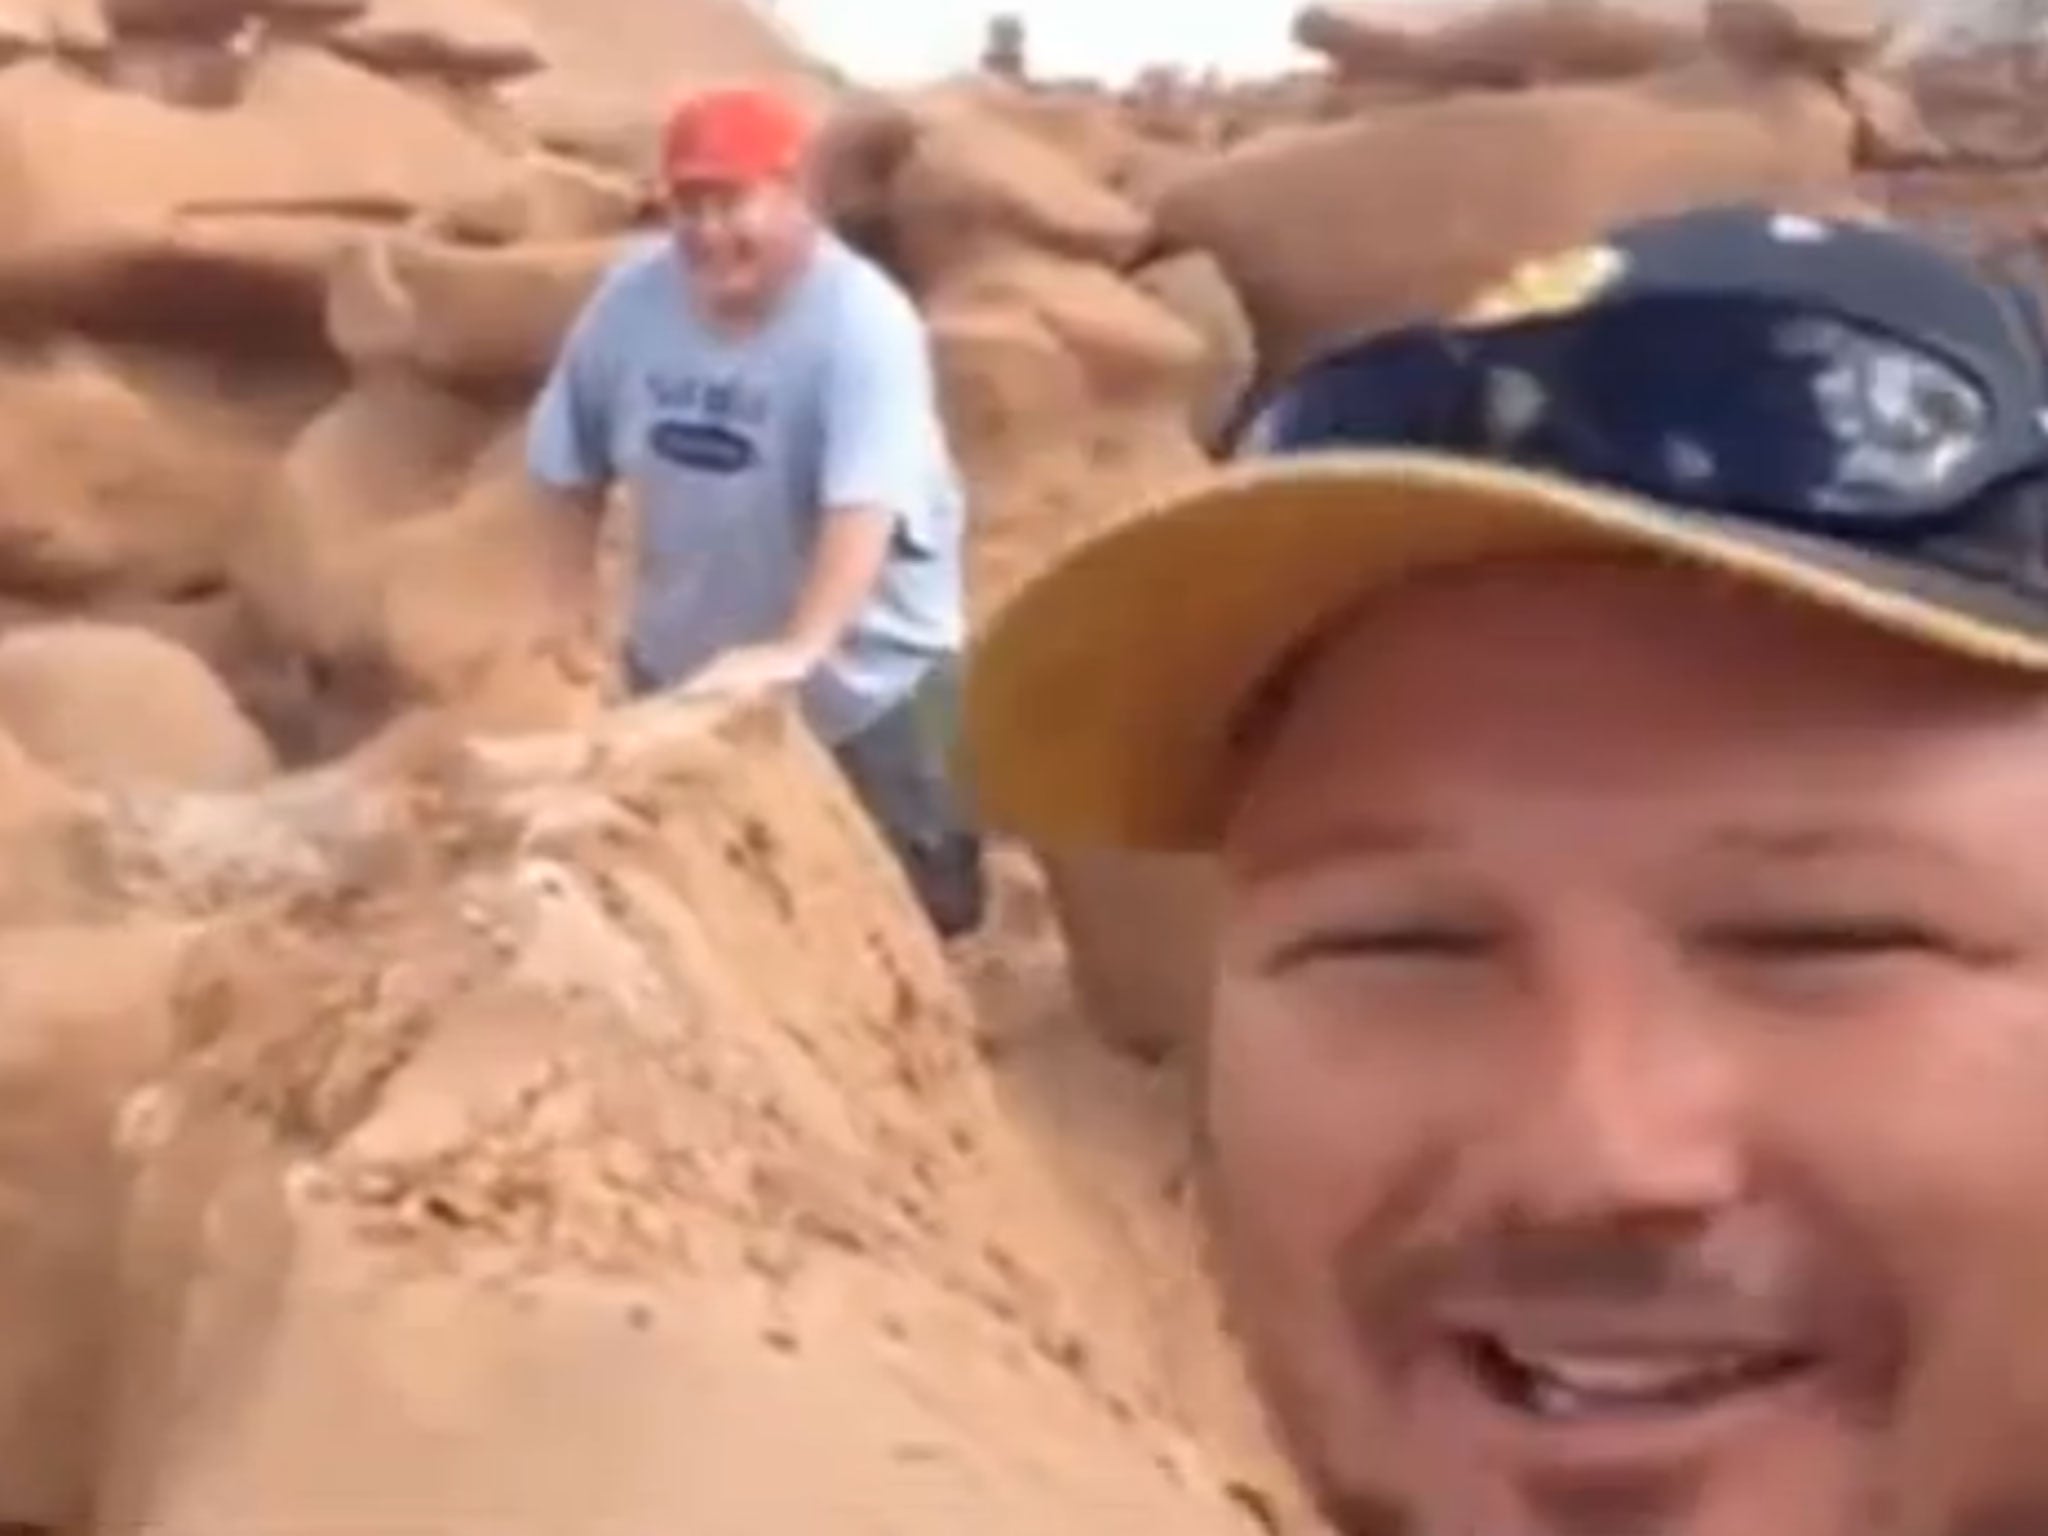 A group of hikers who high-fived each other and celebrated after toppling a 170-million-year-old rock formation in a Utah park are facing possible felony charges after a video of them pushing the formation over was posted on YouTube.